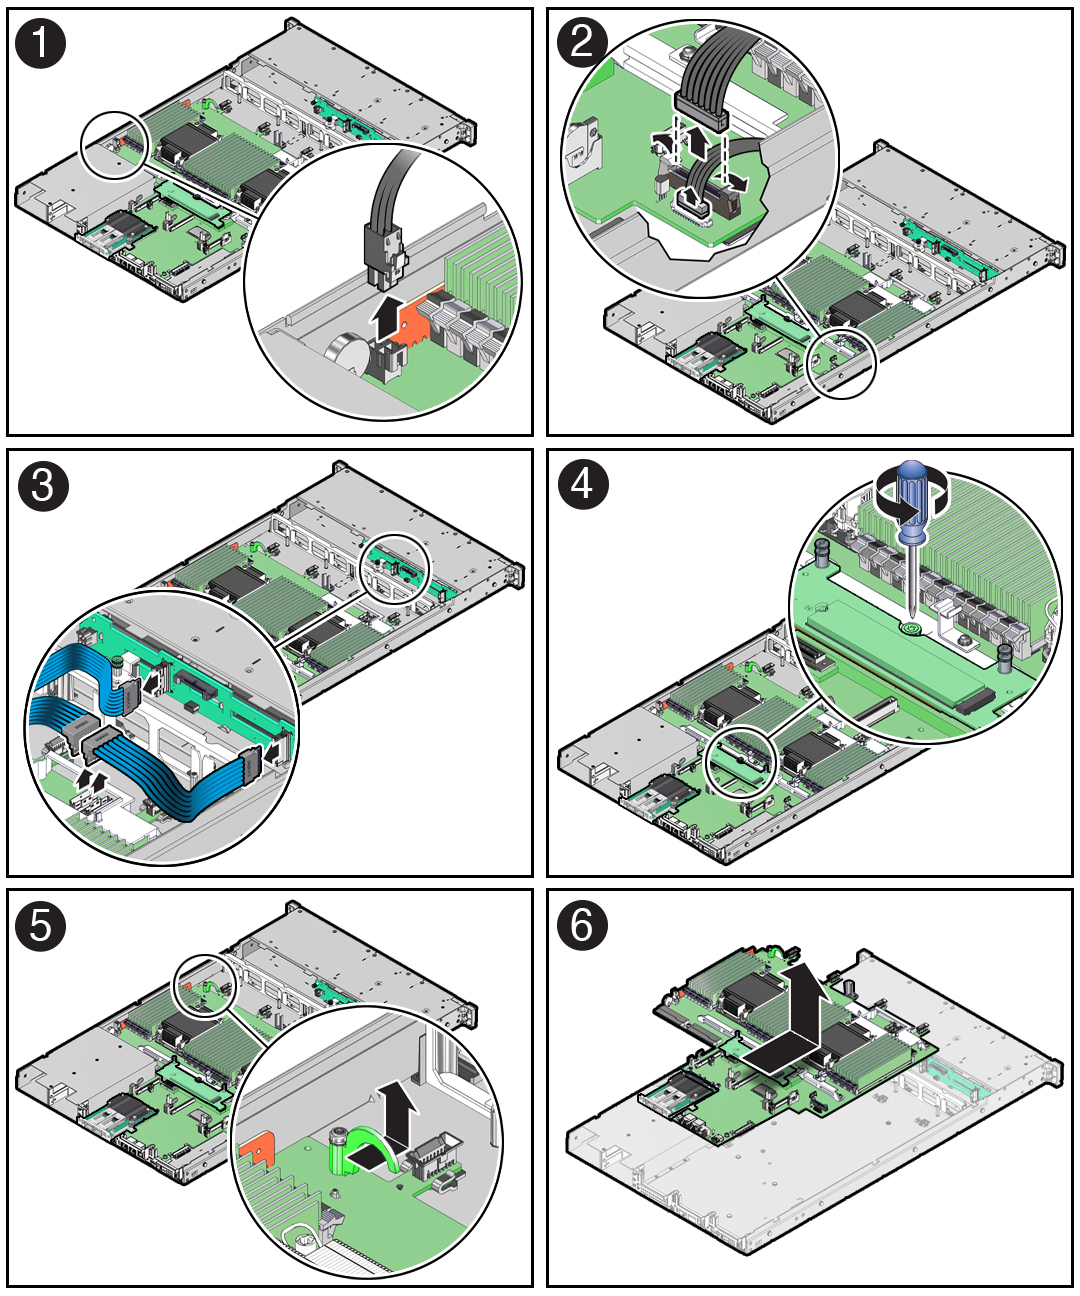 Figure showing how to remove the motherboard from the server.